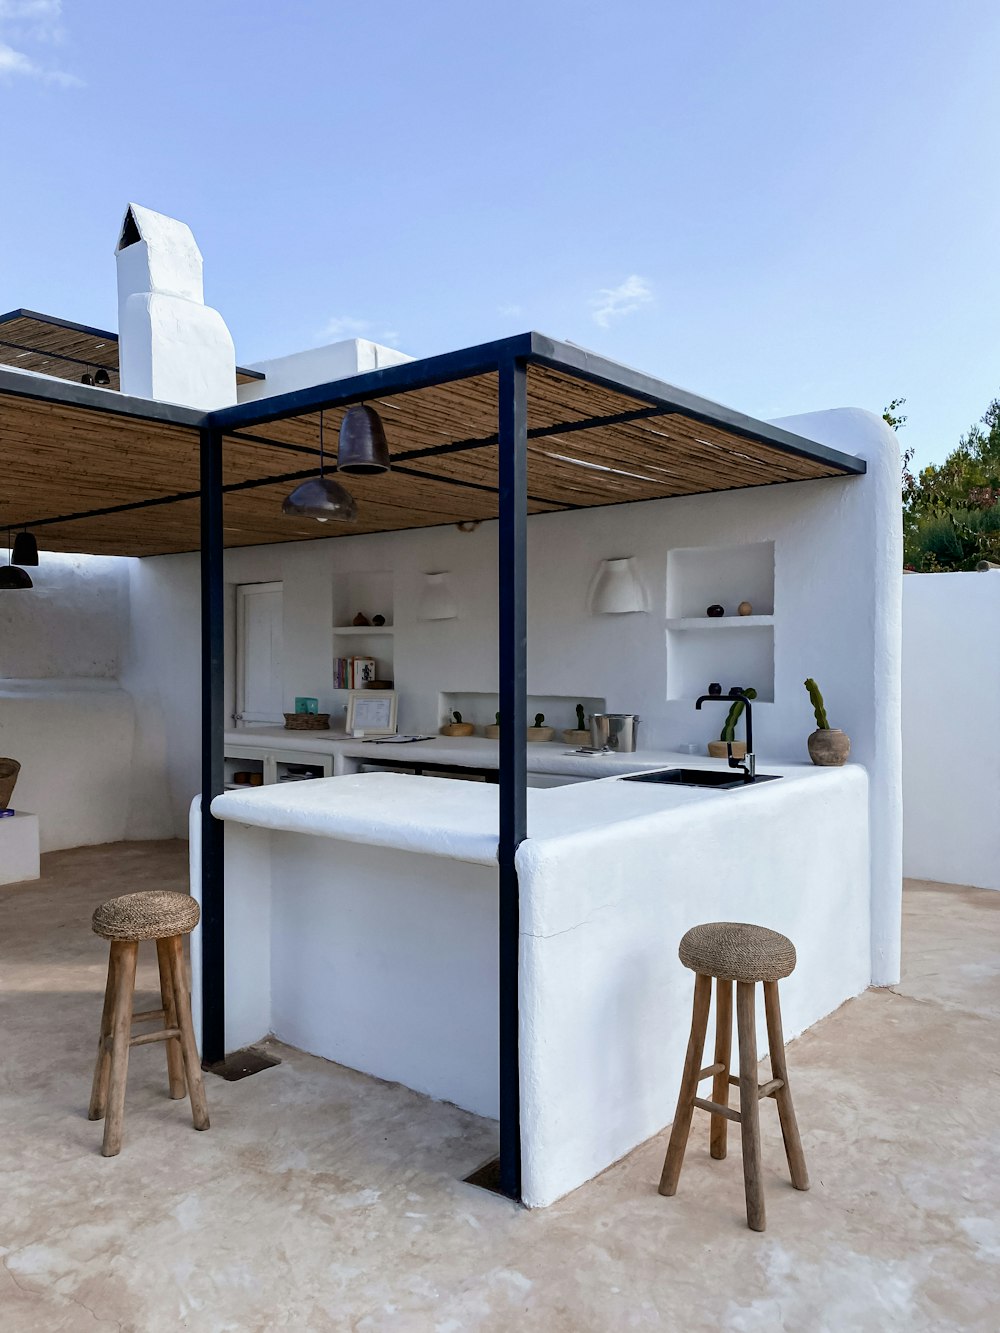 an outdoor kitchen with a bar and stools